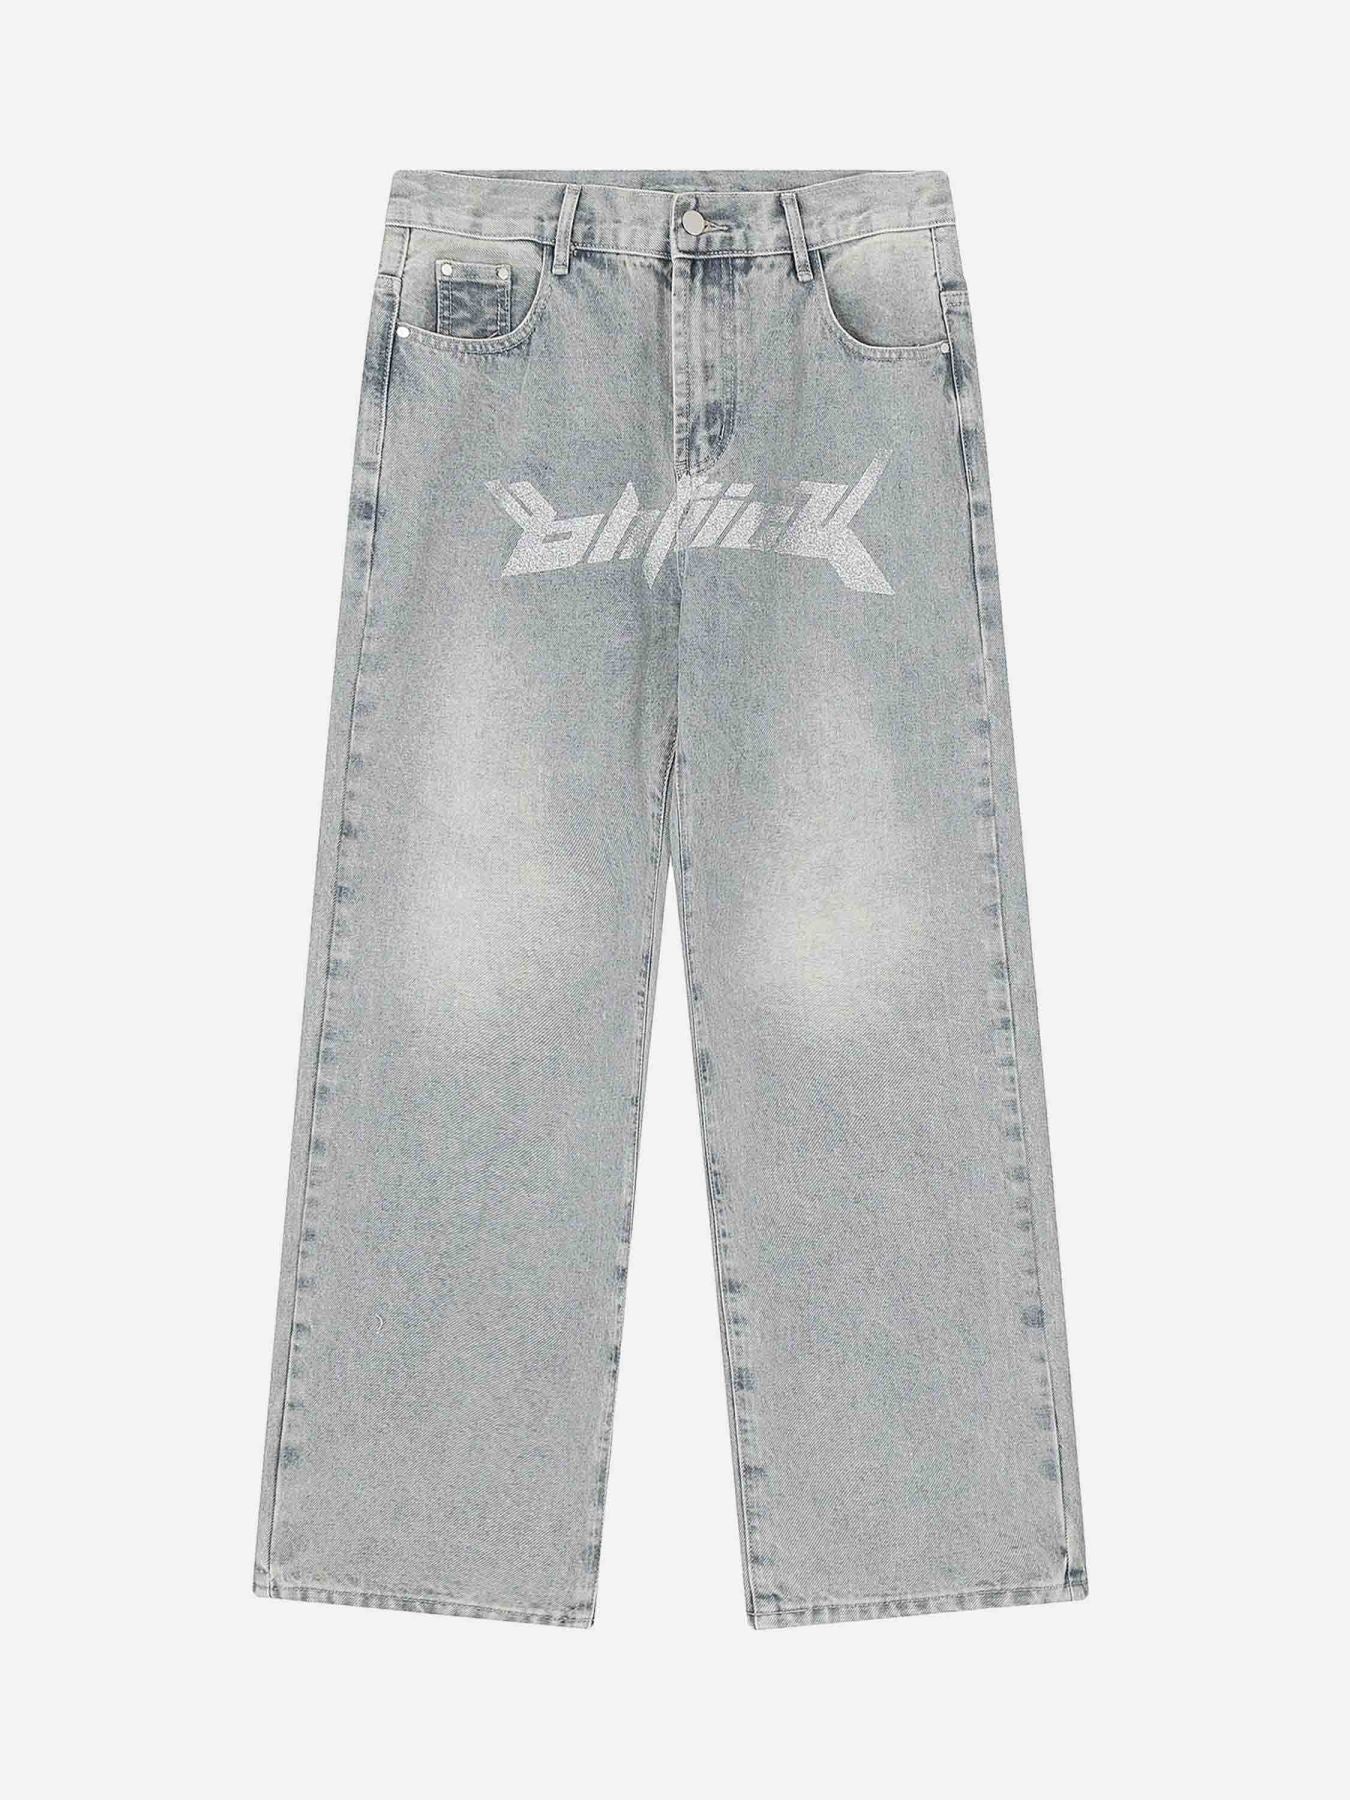 The Supermade Dark Letter Print Jeans